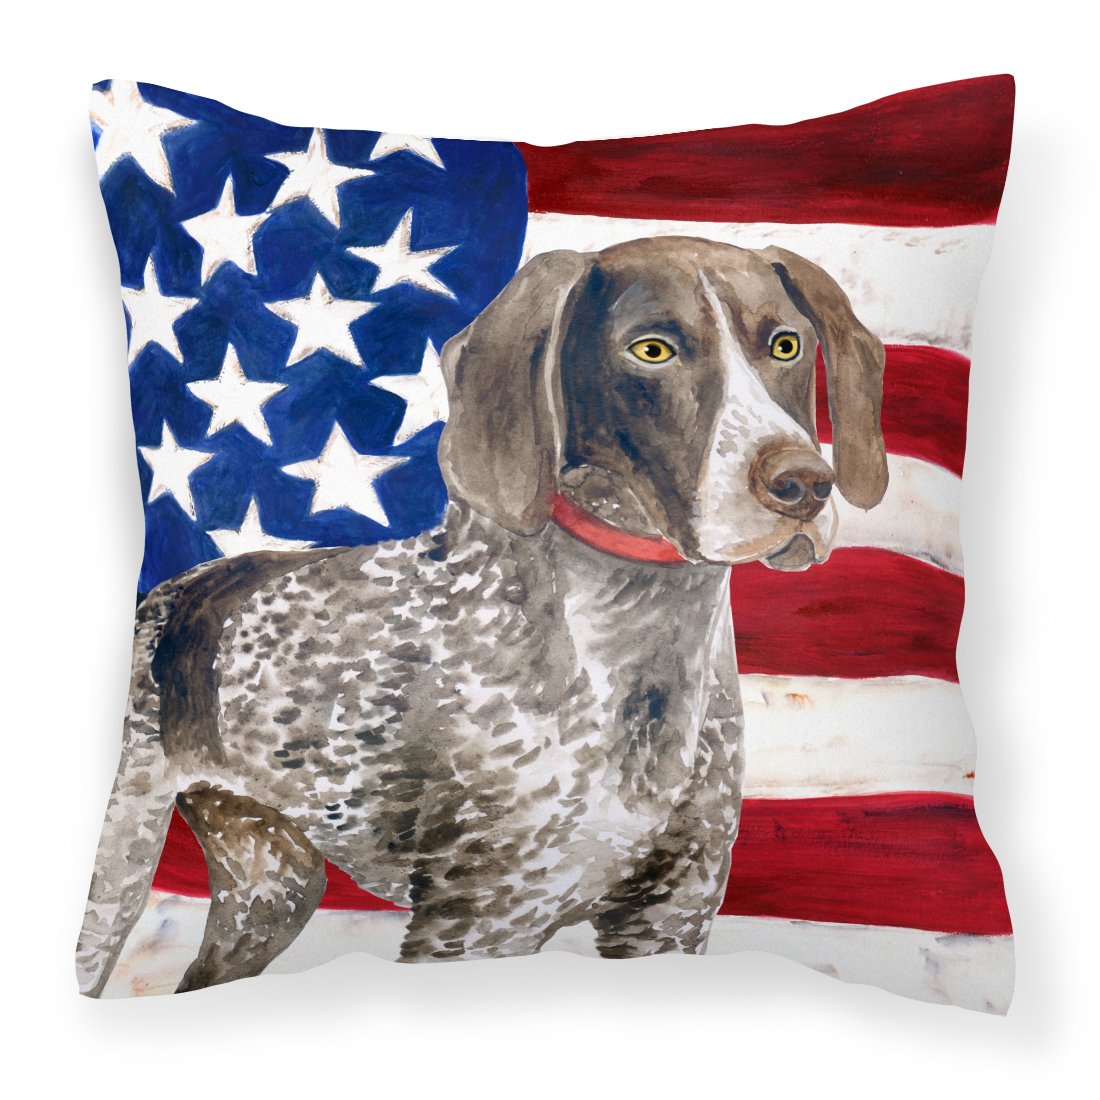 German Shorthaired Pointer Patriotic Fabric Decorative Pillow BB9641PW1818 by Caroline's Treasures